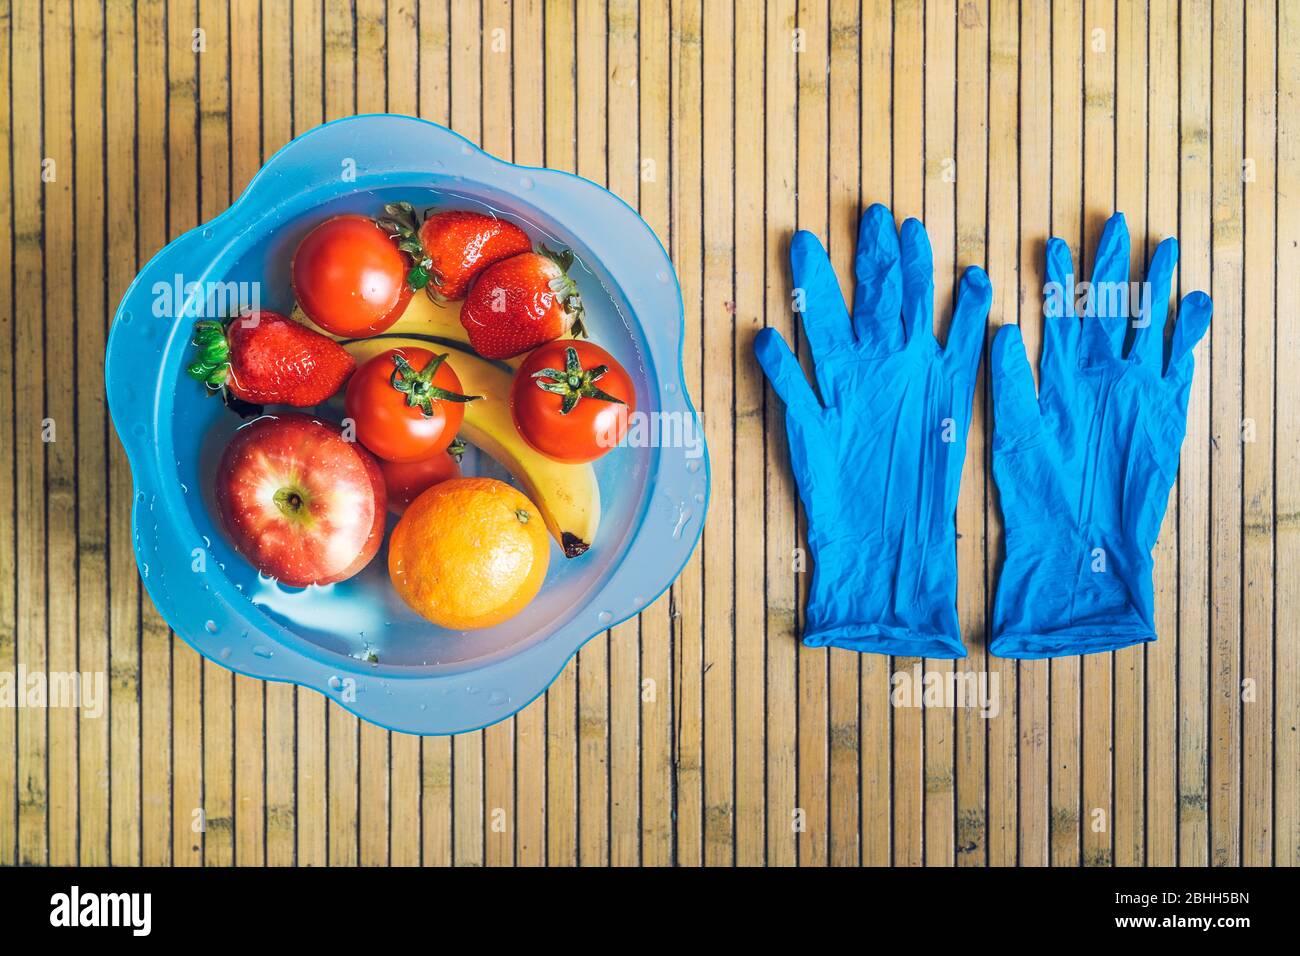 Blue bowl with different fresh and clean fruits on a wooden base with blue latex gloves. Bananas, tomatoes, apples, strawberries and oranges immersed Stock Photo